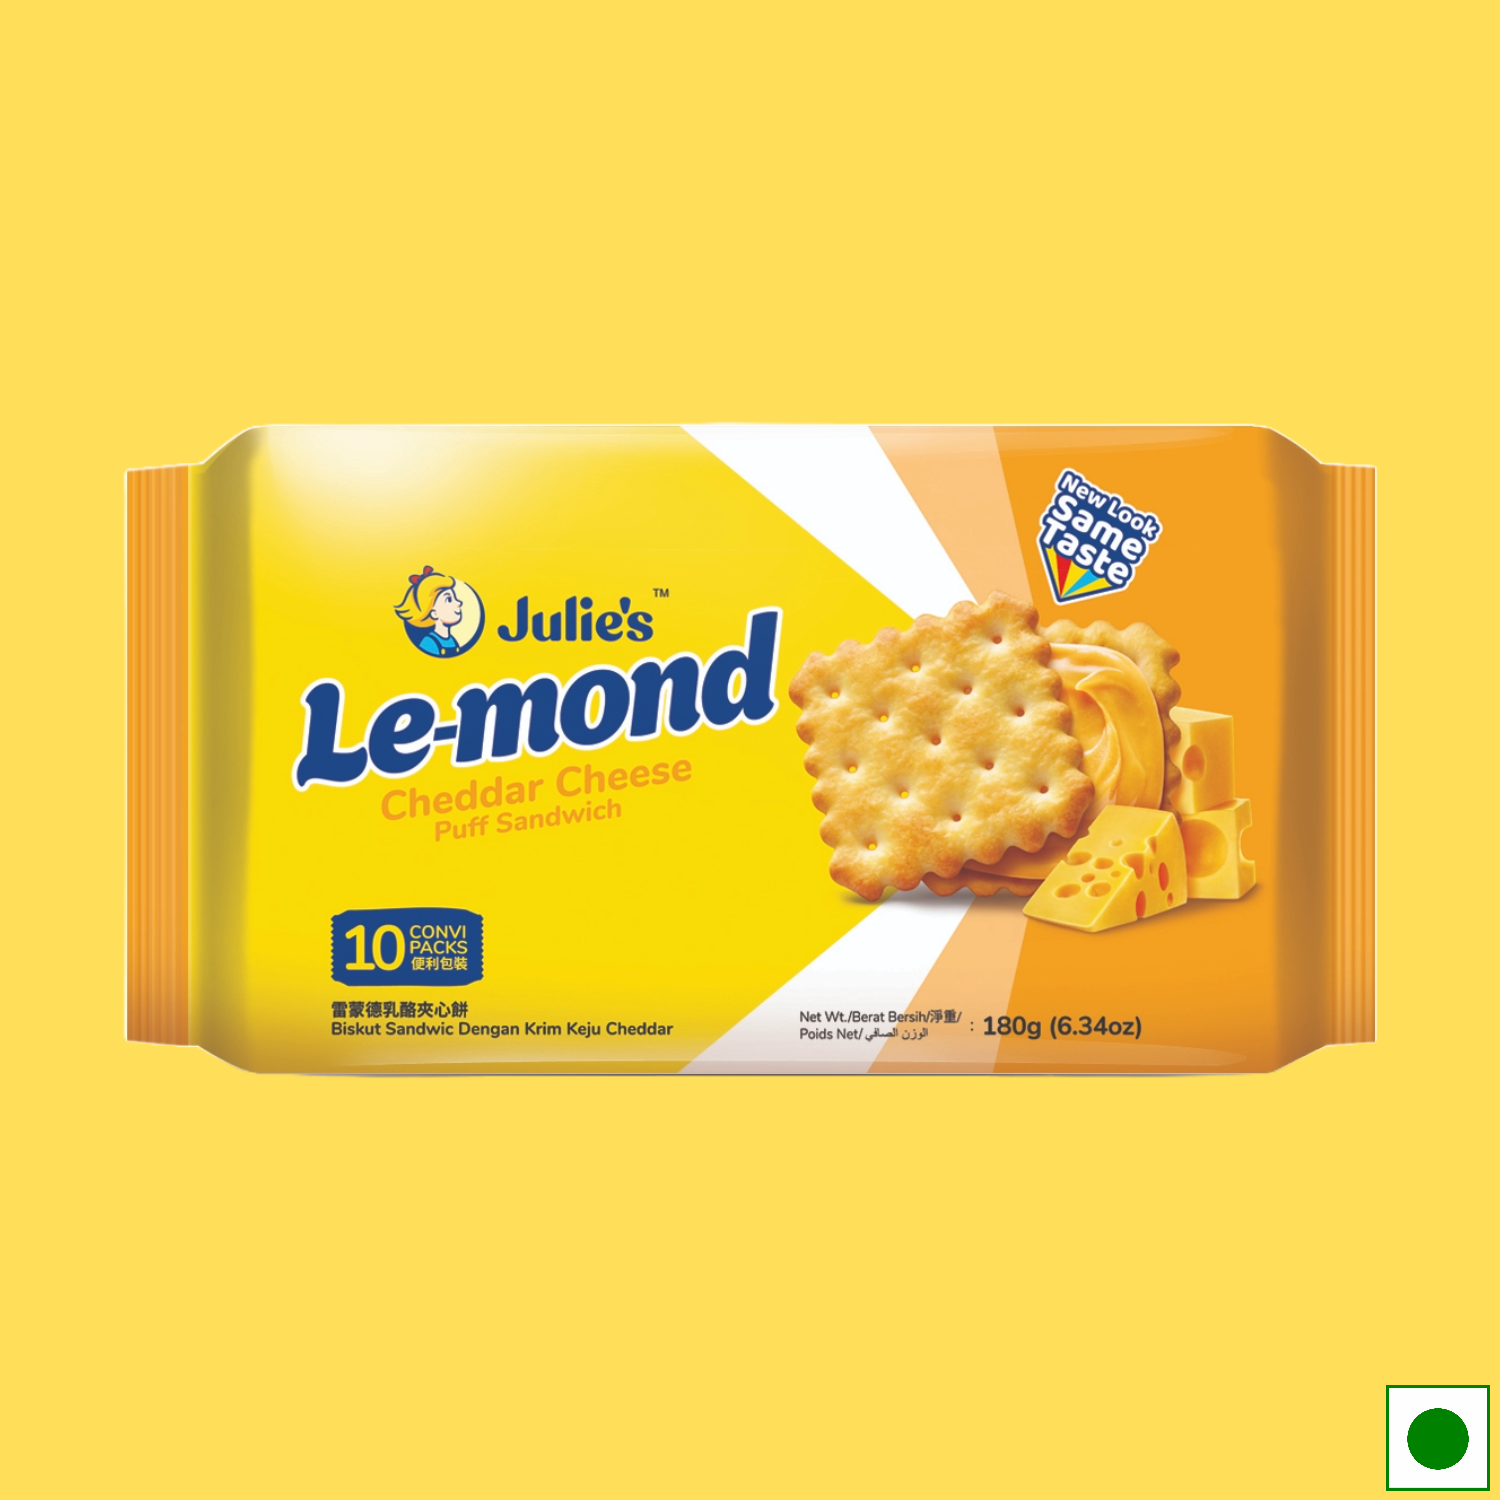 Julie's Le Mond Cheddar Cheese Sandwich, 180g (Imported)